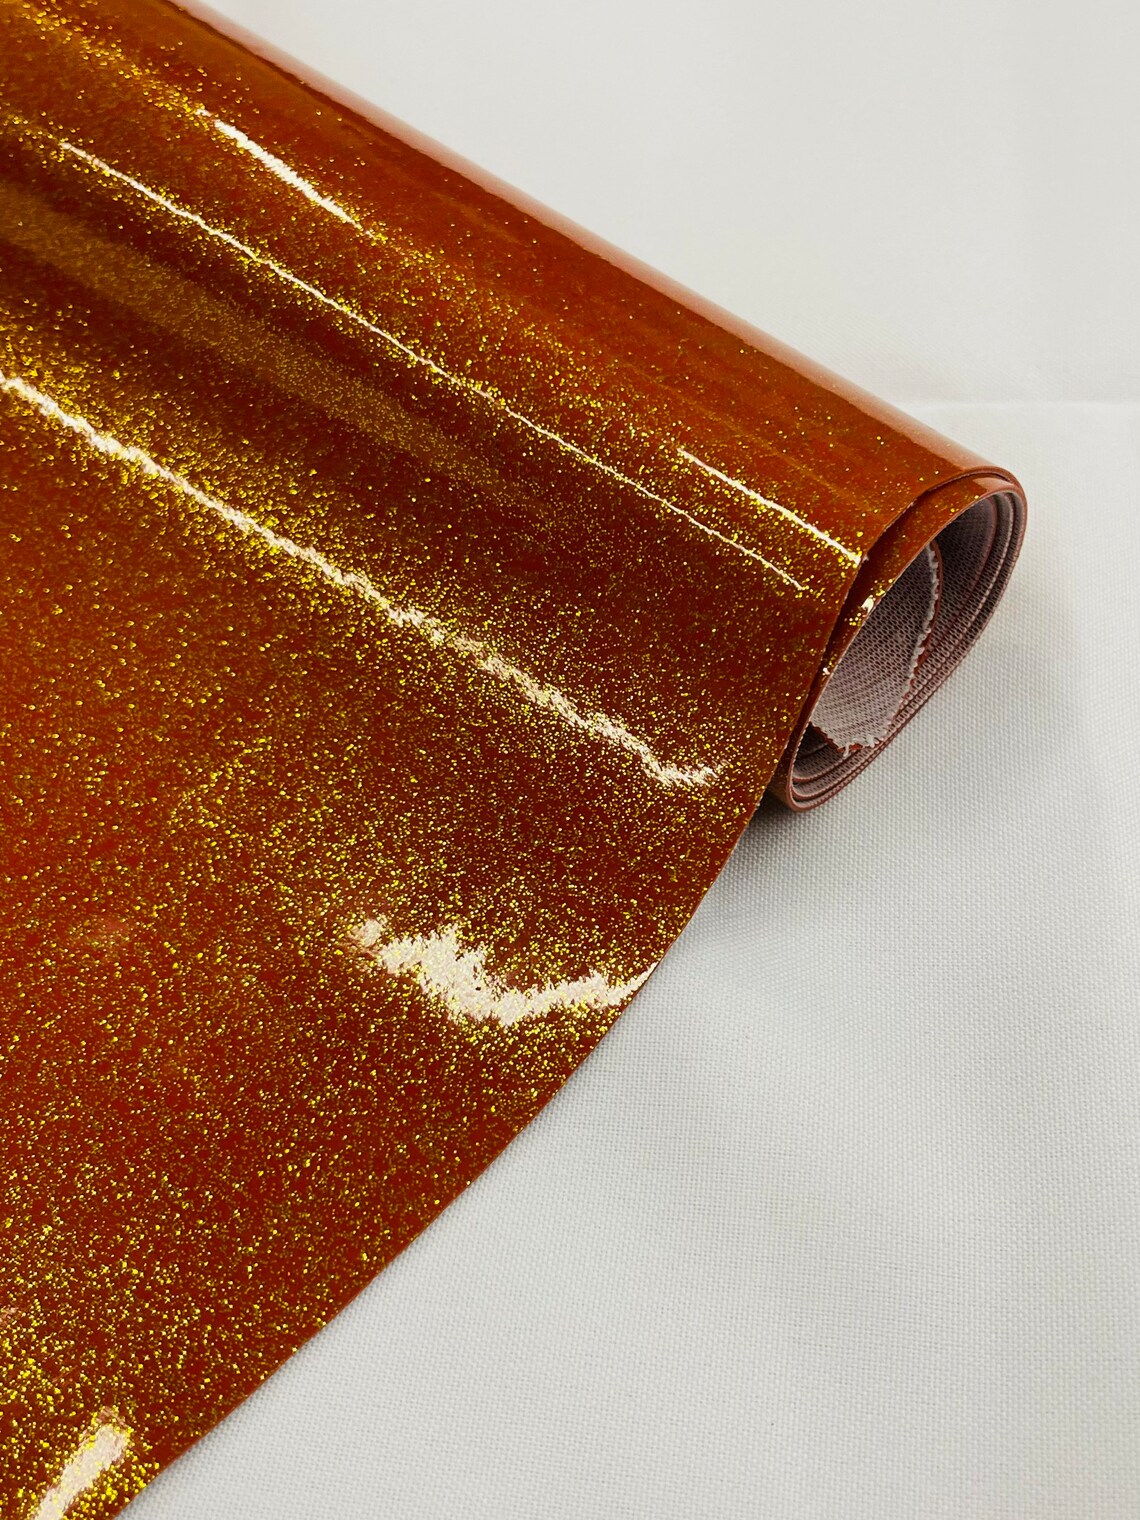 Fine GLITTER 3-4-5 or 6 Sq Ft BURNT ORANGE Glitter Fabric Applied to  Leather 5-5.5oz/ 2-2.2 Mm Peggysuealso® E4355-47 